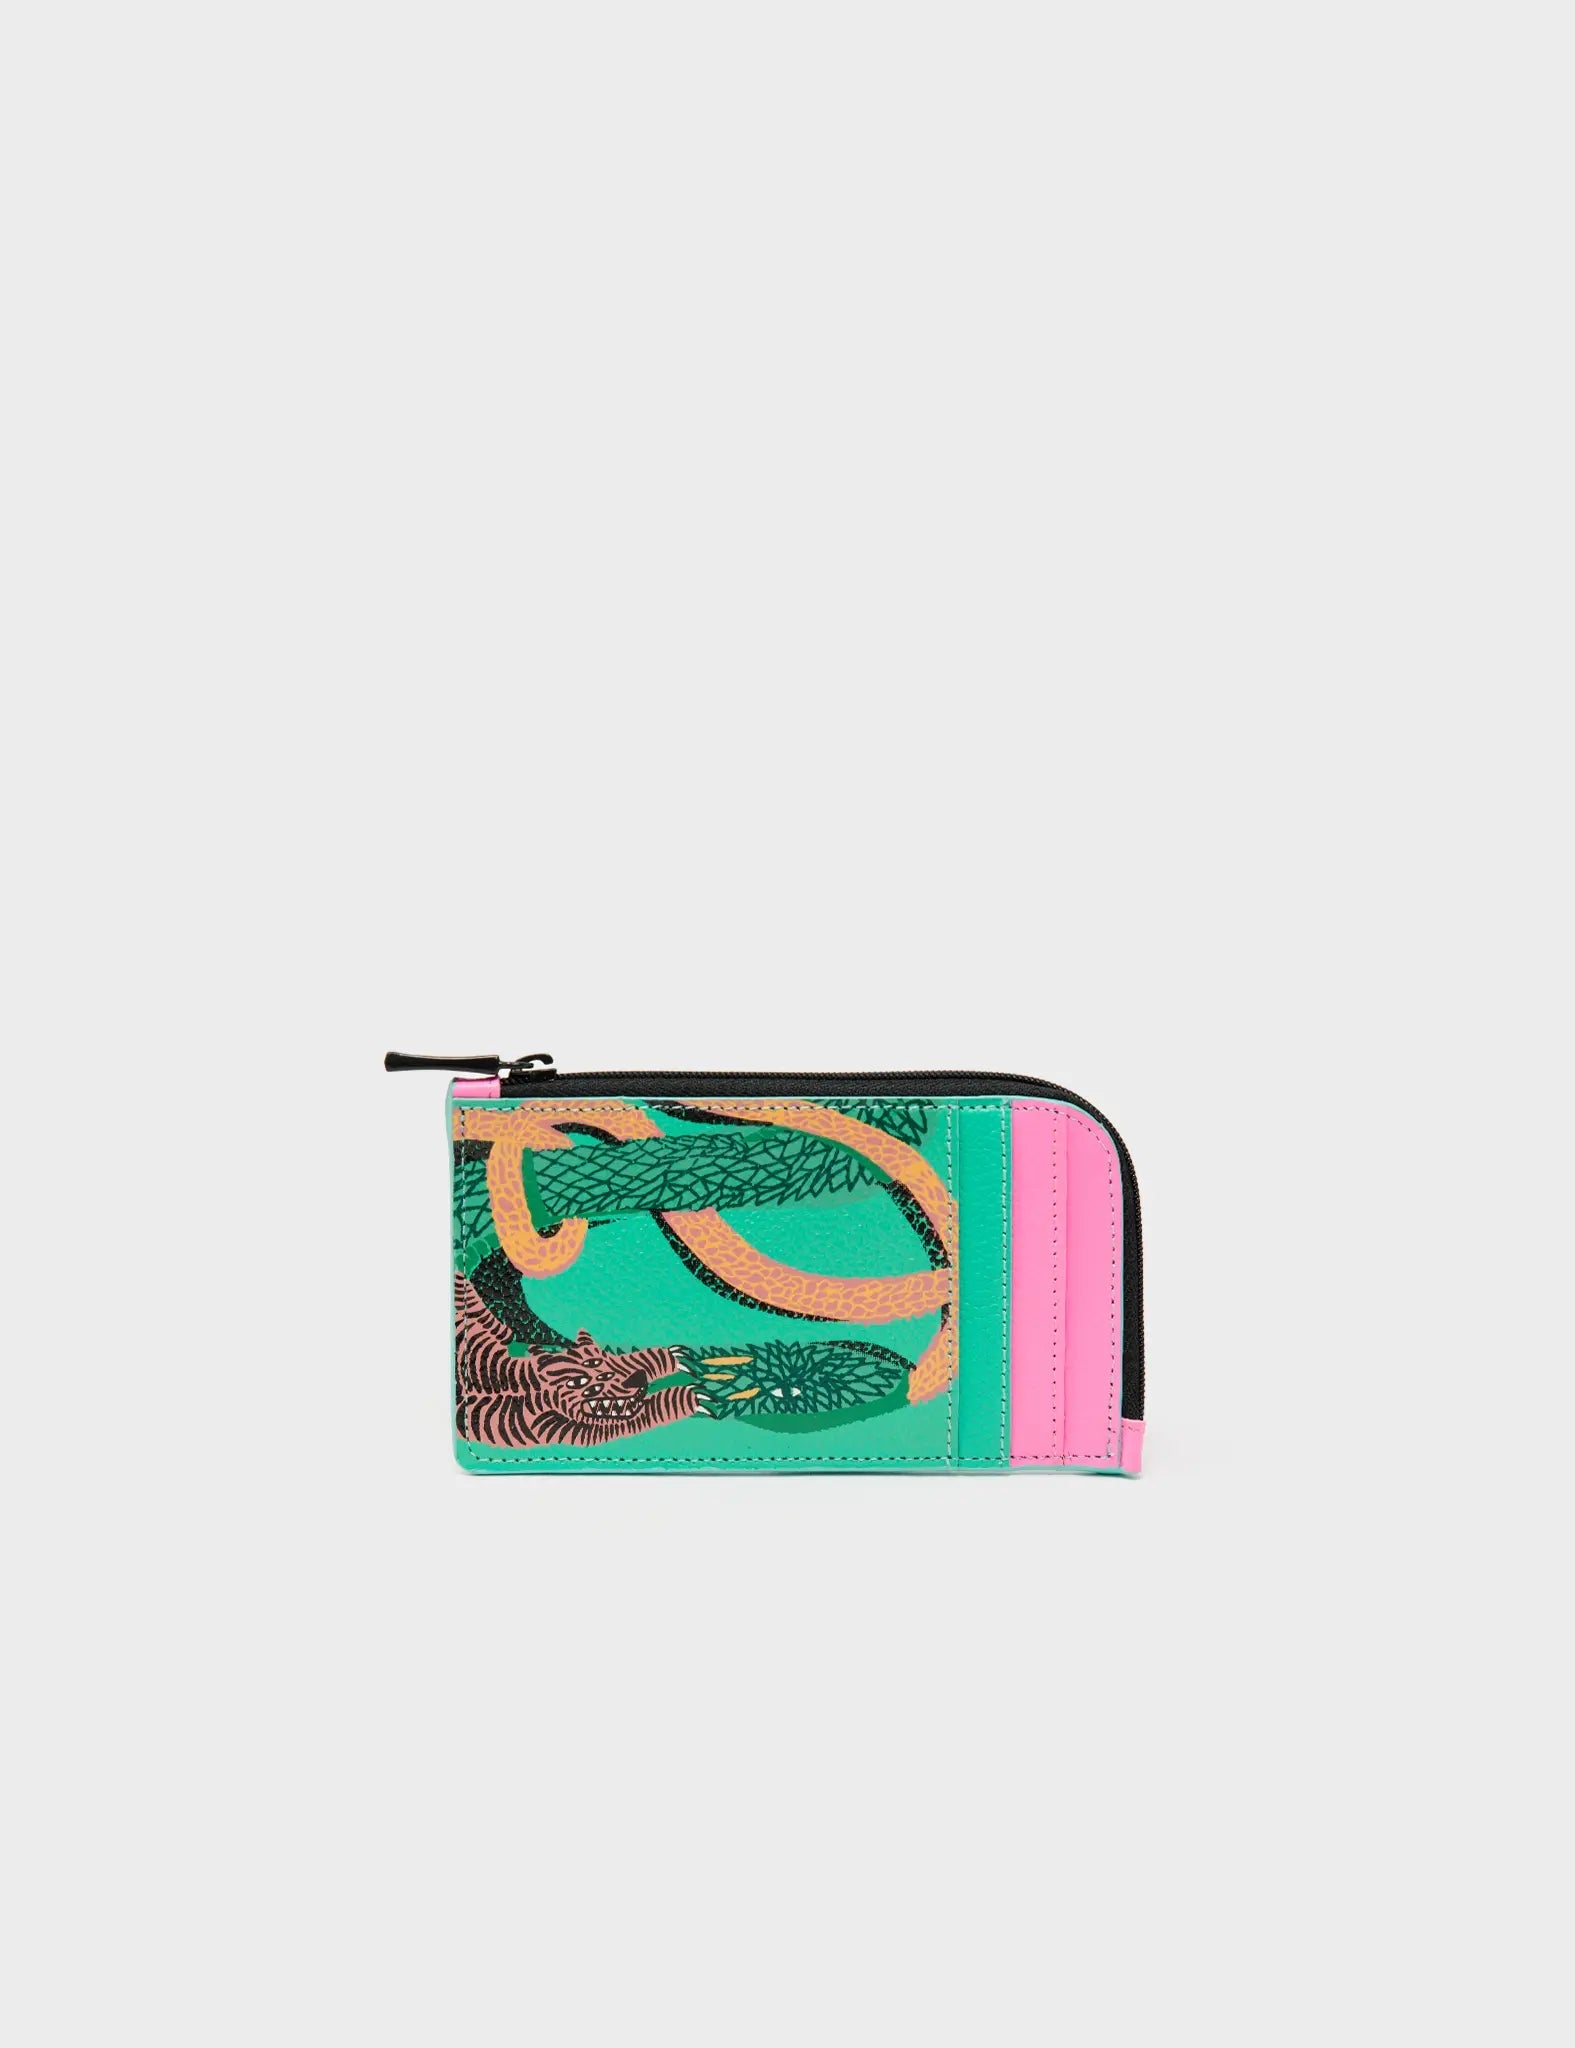    Fausto Wallet - Biscay Green Leather Tangle Tales Print - Front viewZip-around Wallet - Biscay Green Leather Tiger and Snake Print